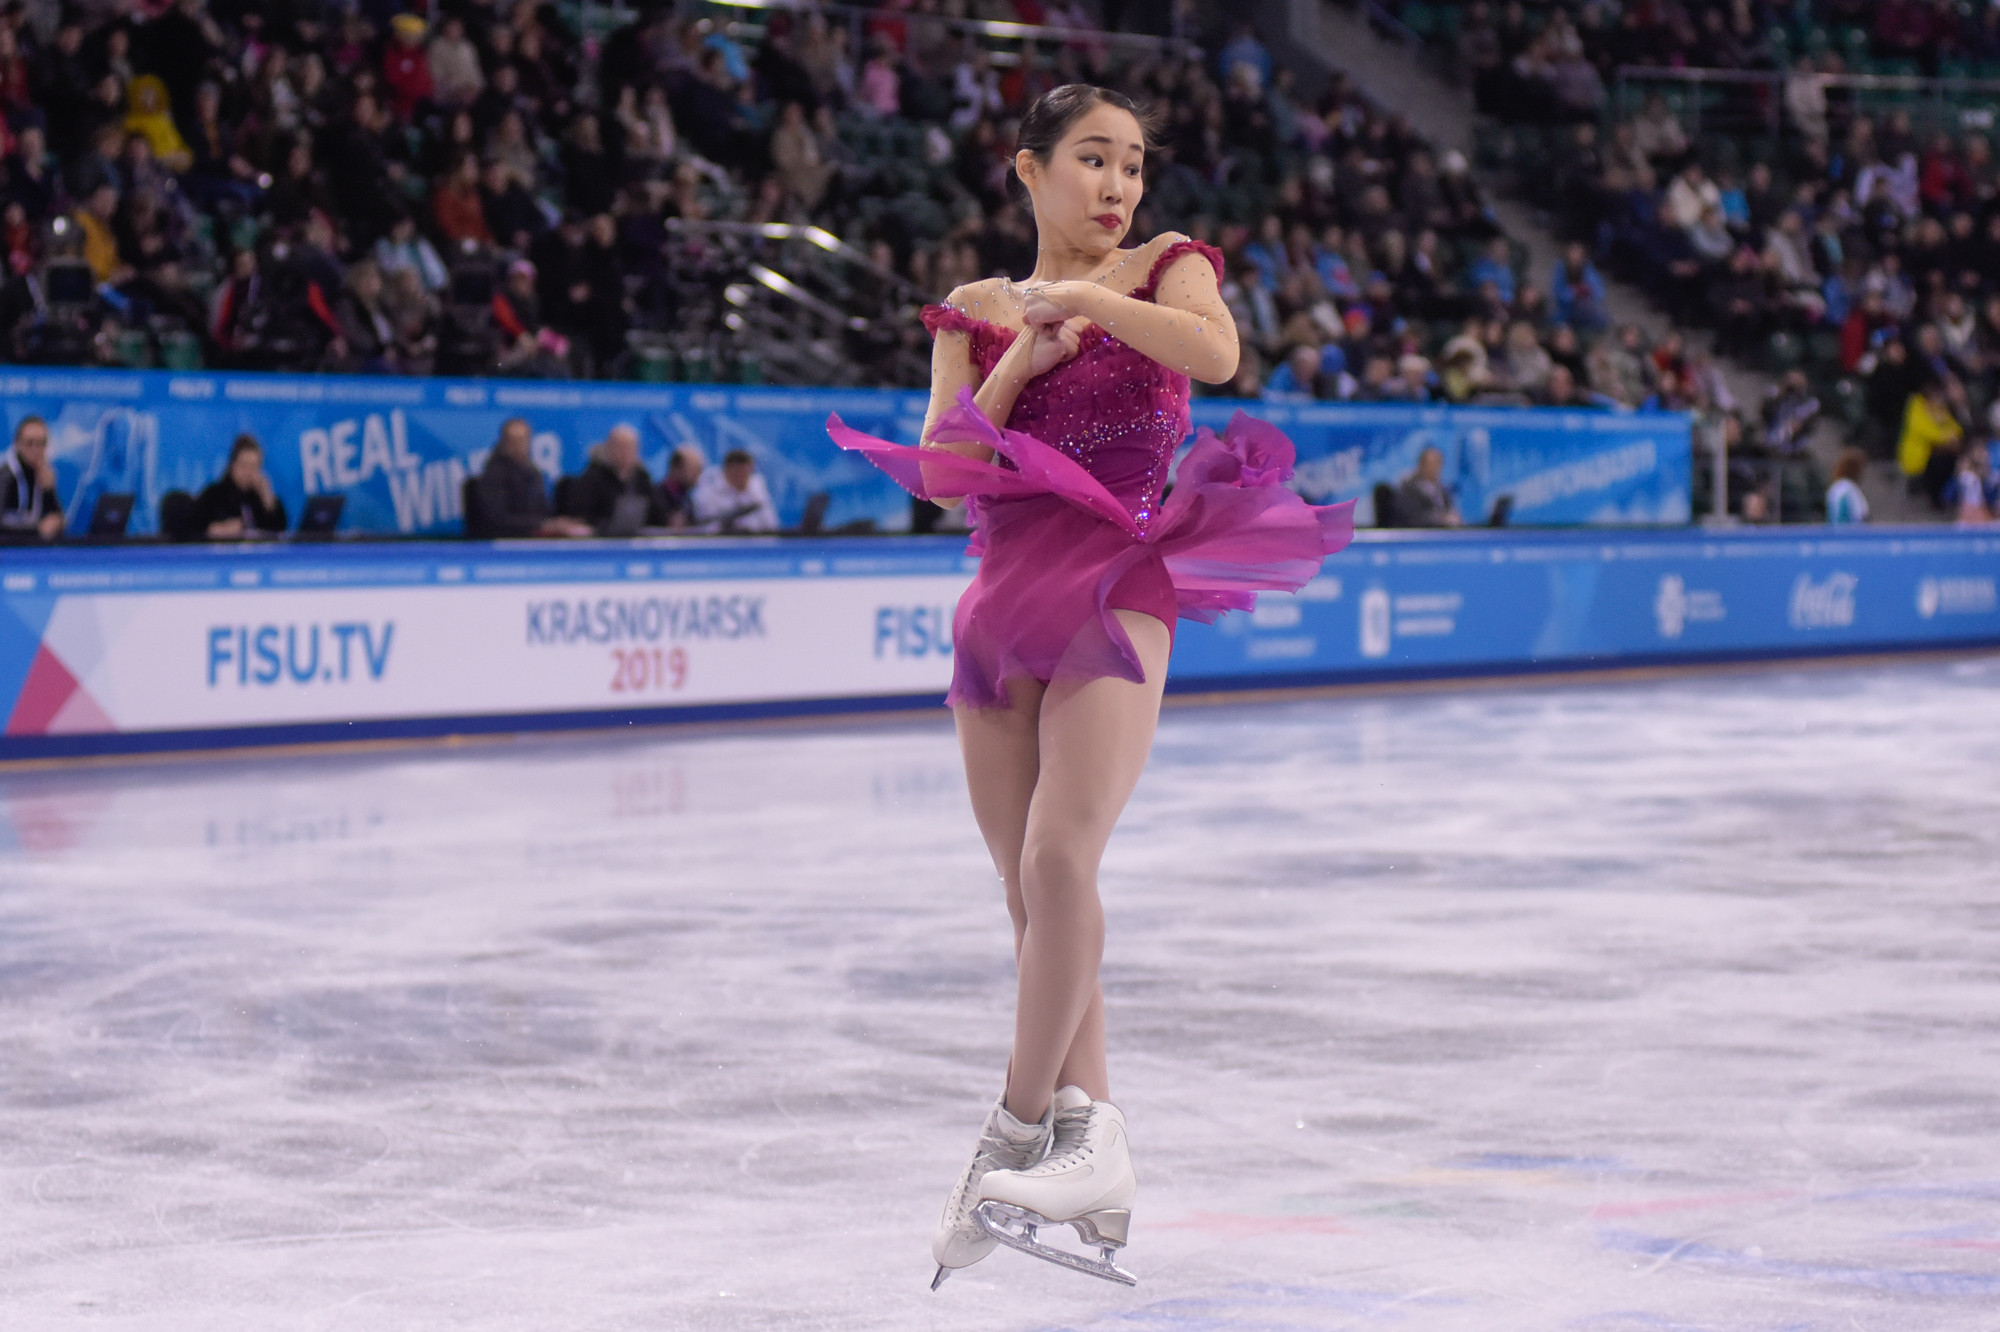 The women's figure skating competition also began, with Japan's Mai Mihara achieving today's highest score ©Krasnoyarsk 2019